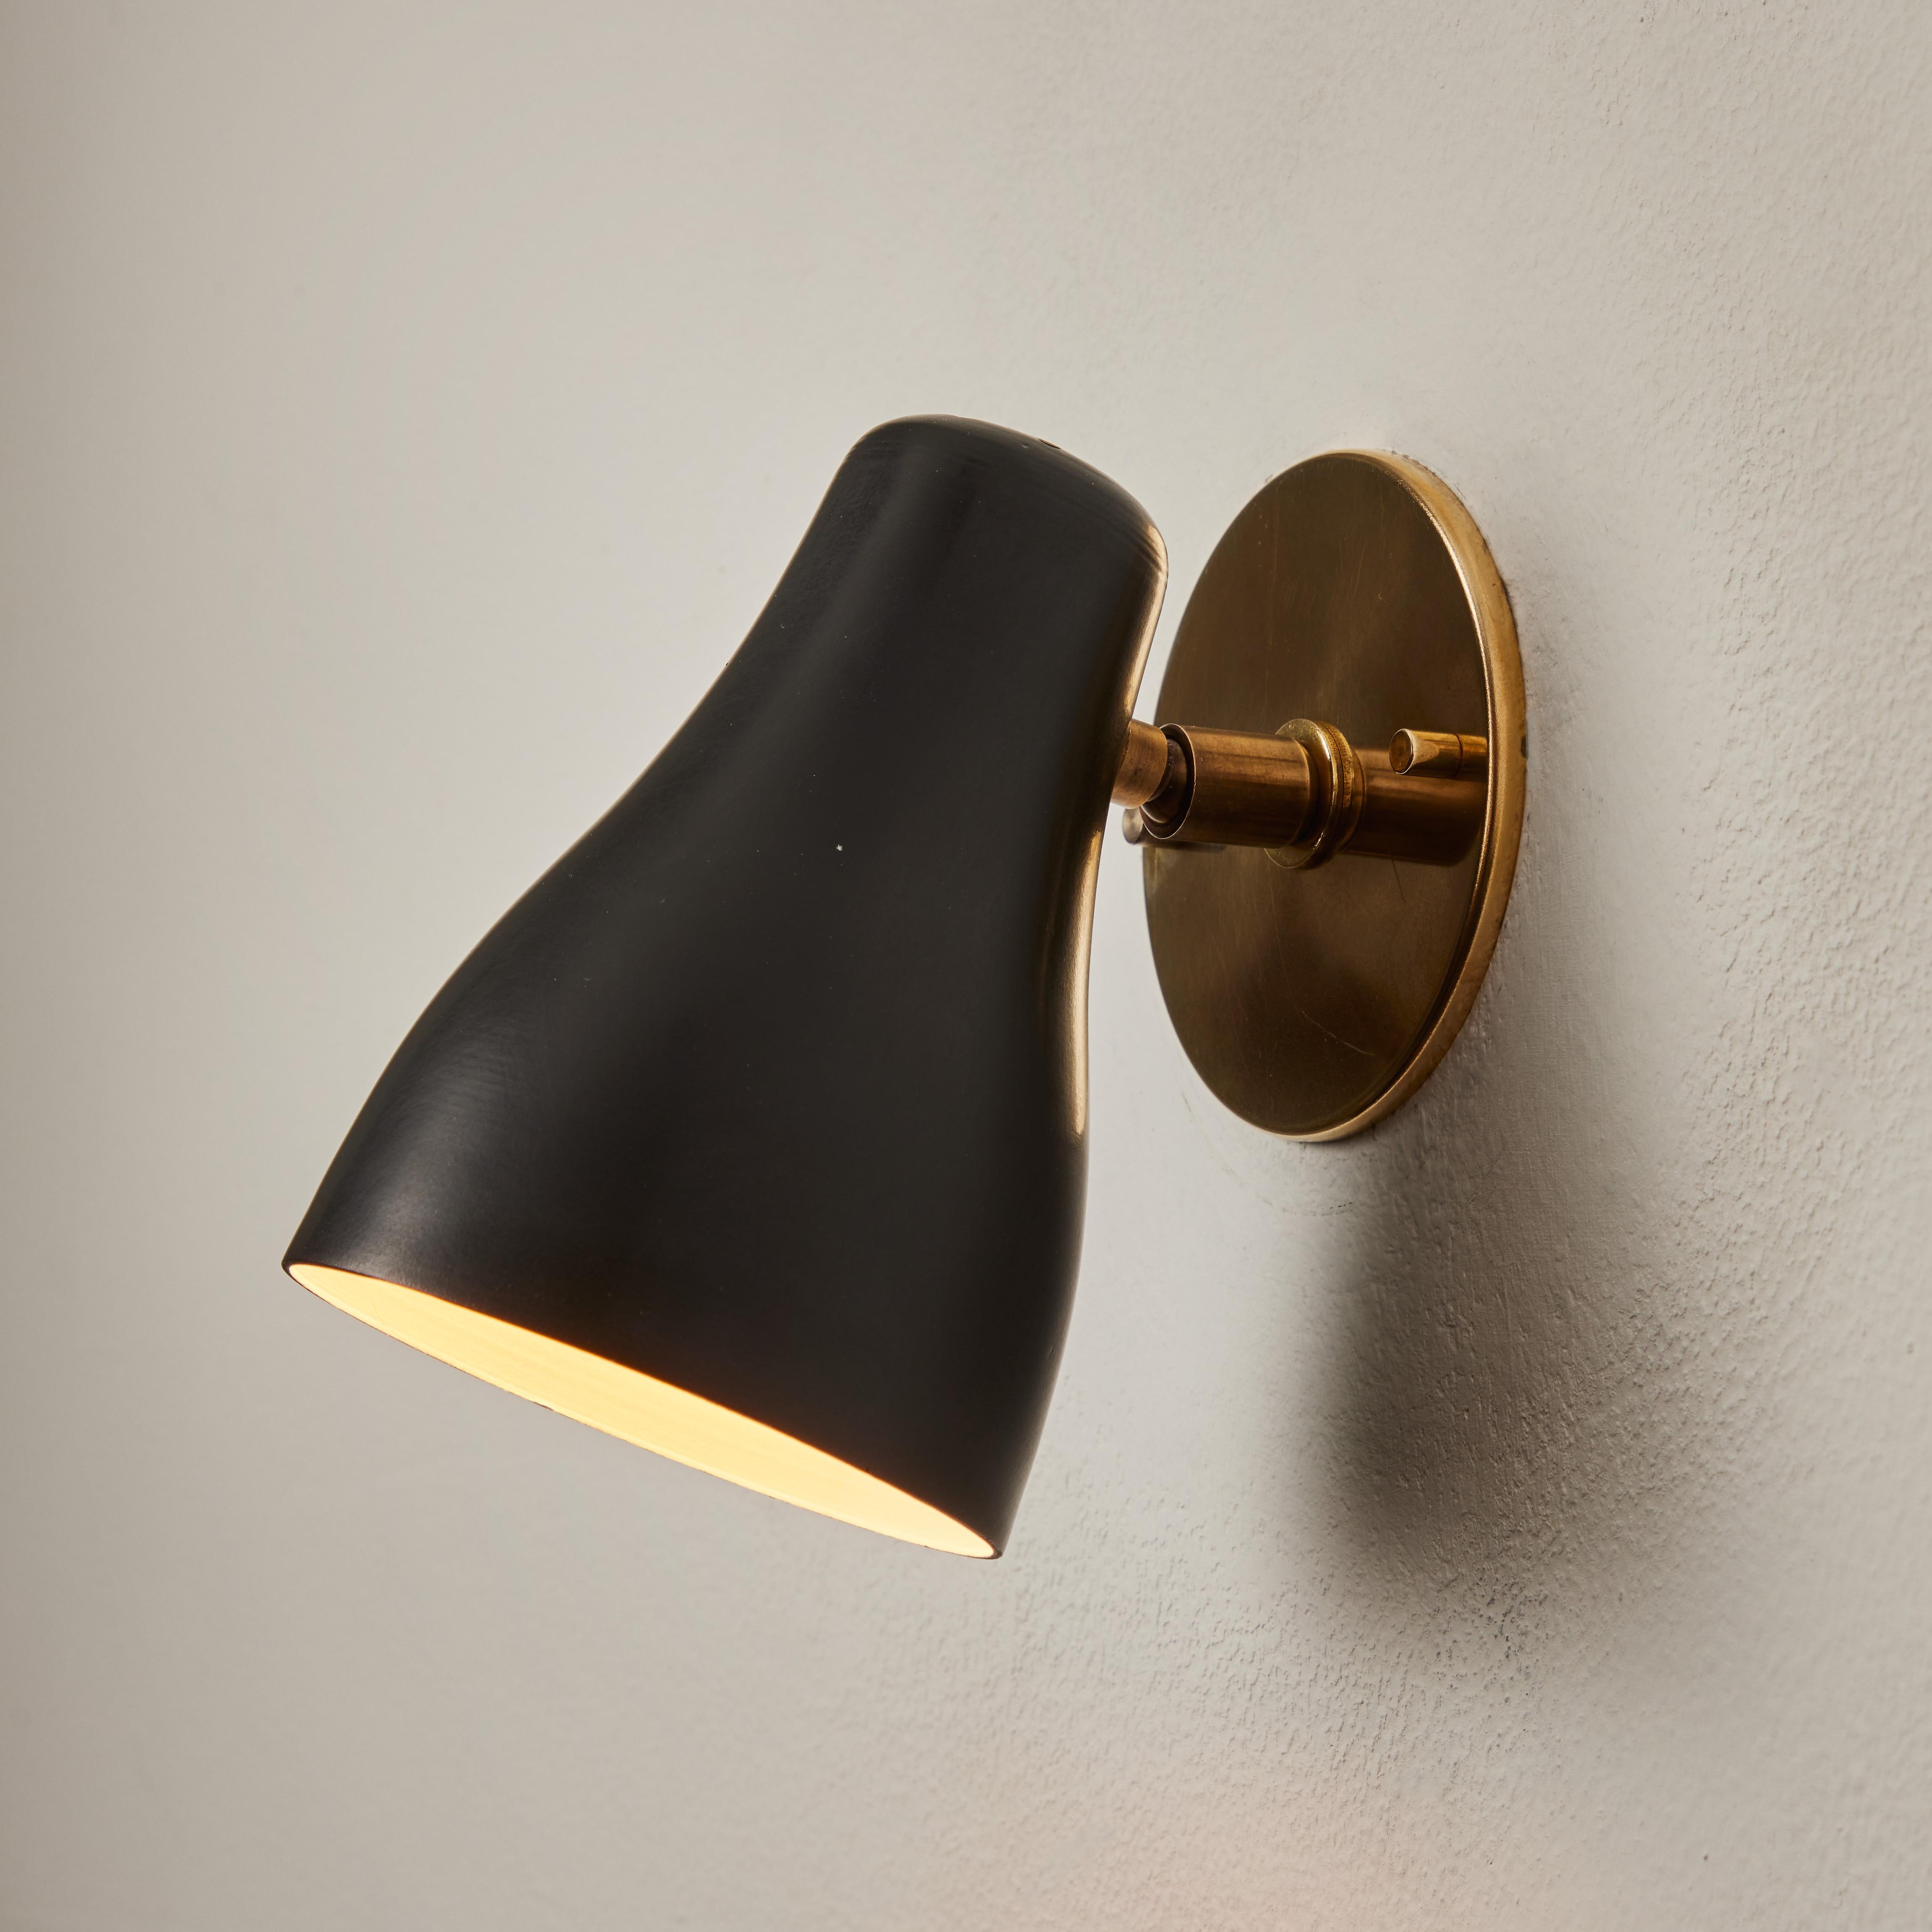 1960s Black and brass wall lamp attributed to Jacques Biny. An exceptionally clean and simple design executed in brass with a black metal shade. Lamp rotates freely on adjustable swivel. Quintessentially midcentury French in its conception and